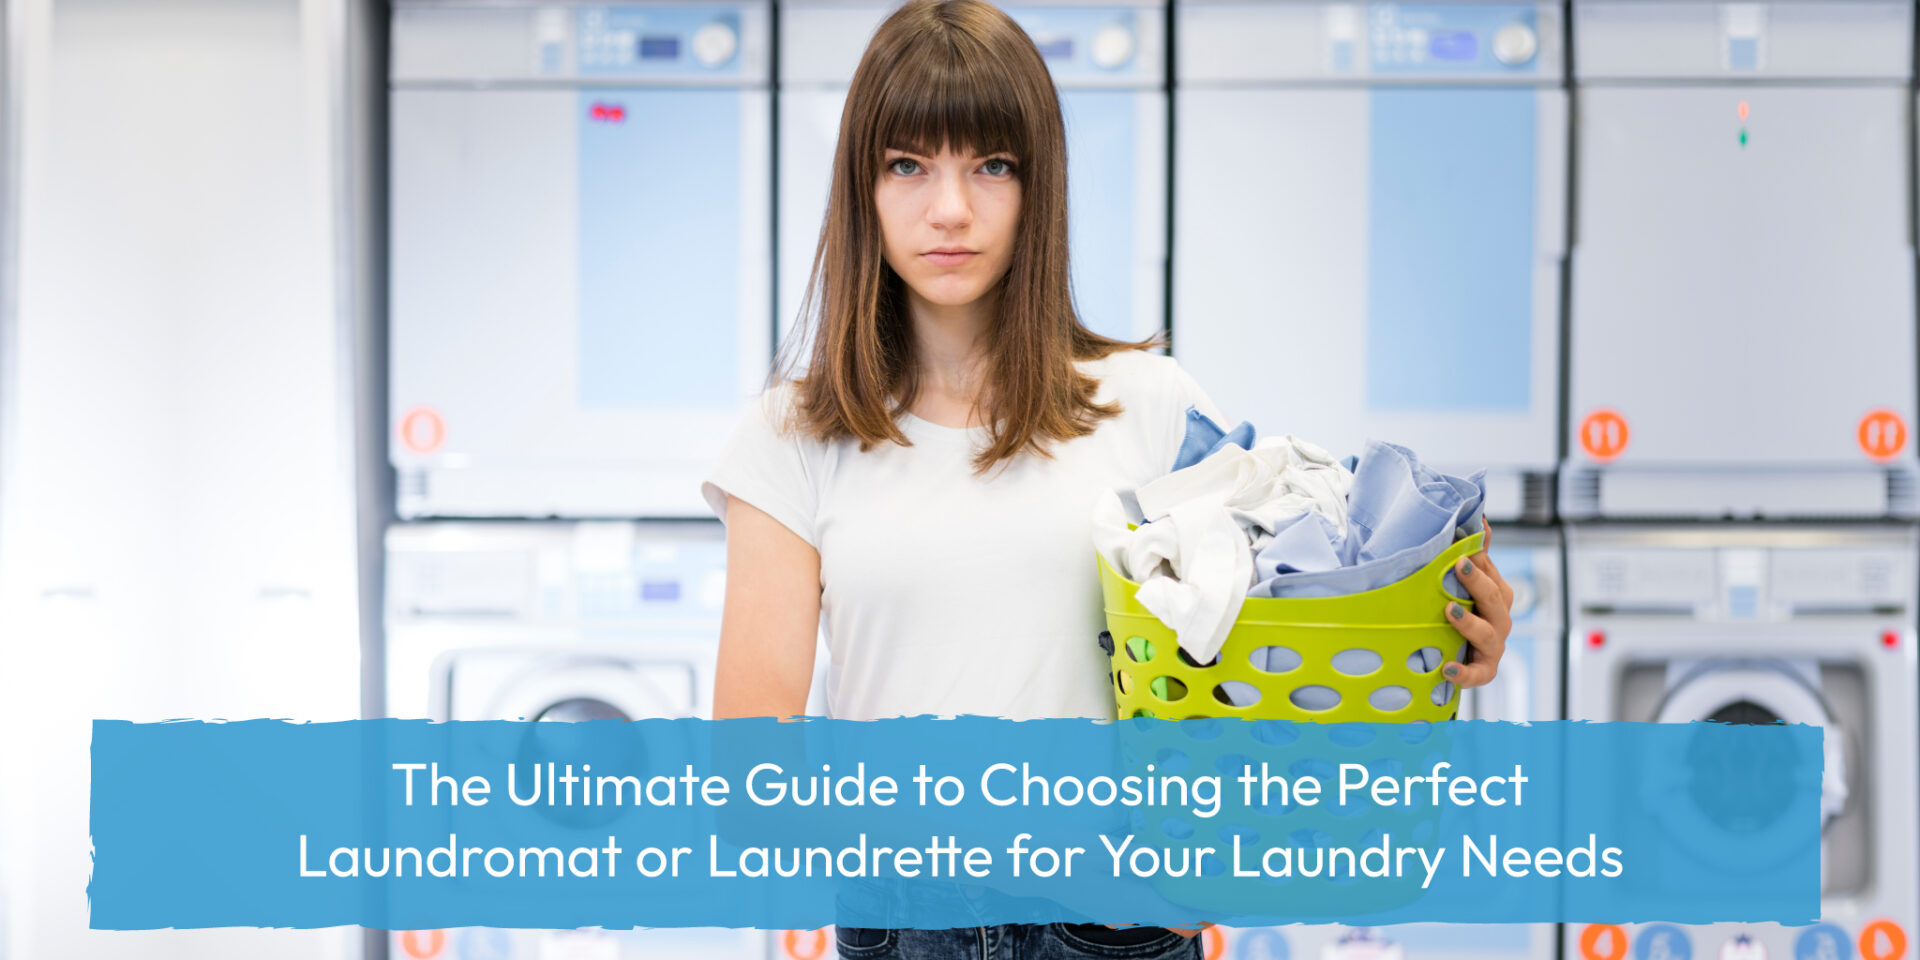 The Ultimate Guide to Choosing the Perfect Laundromat or Laundrette for Your Laundry Needs